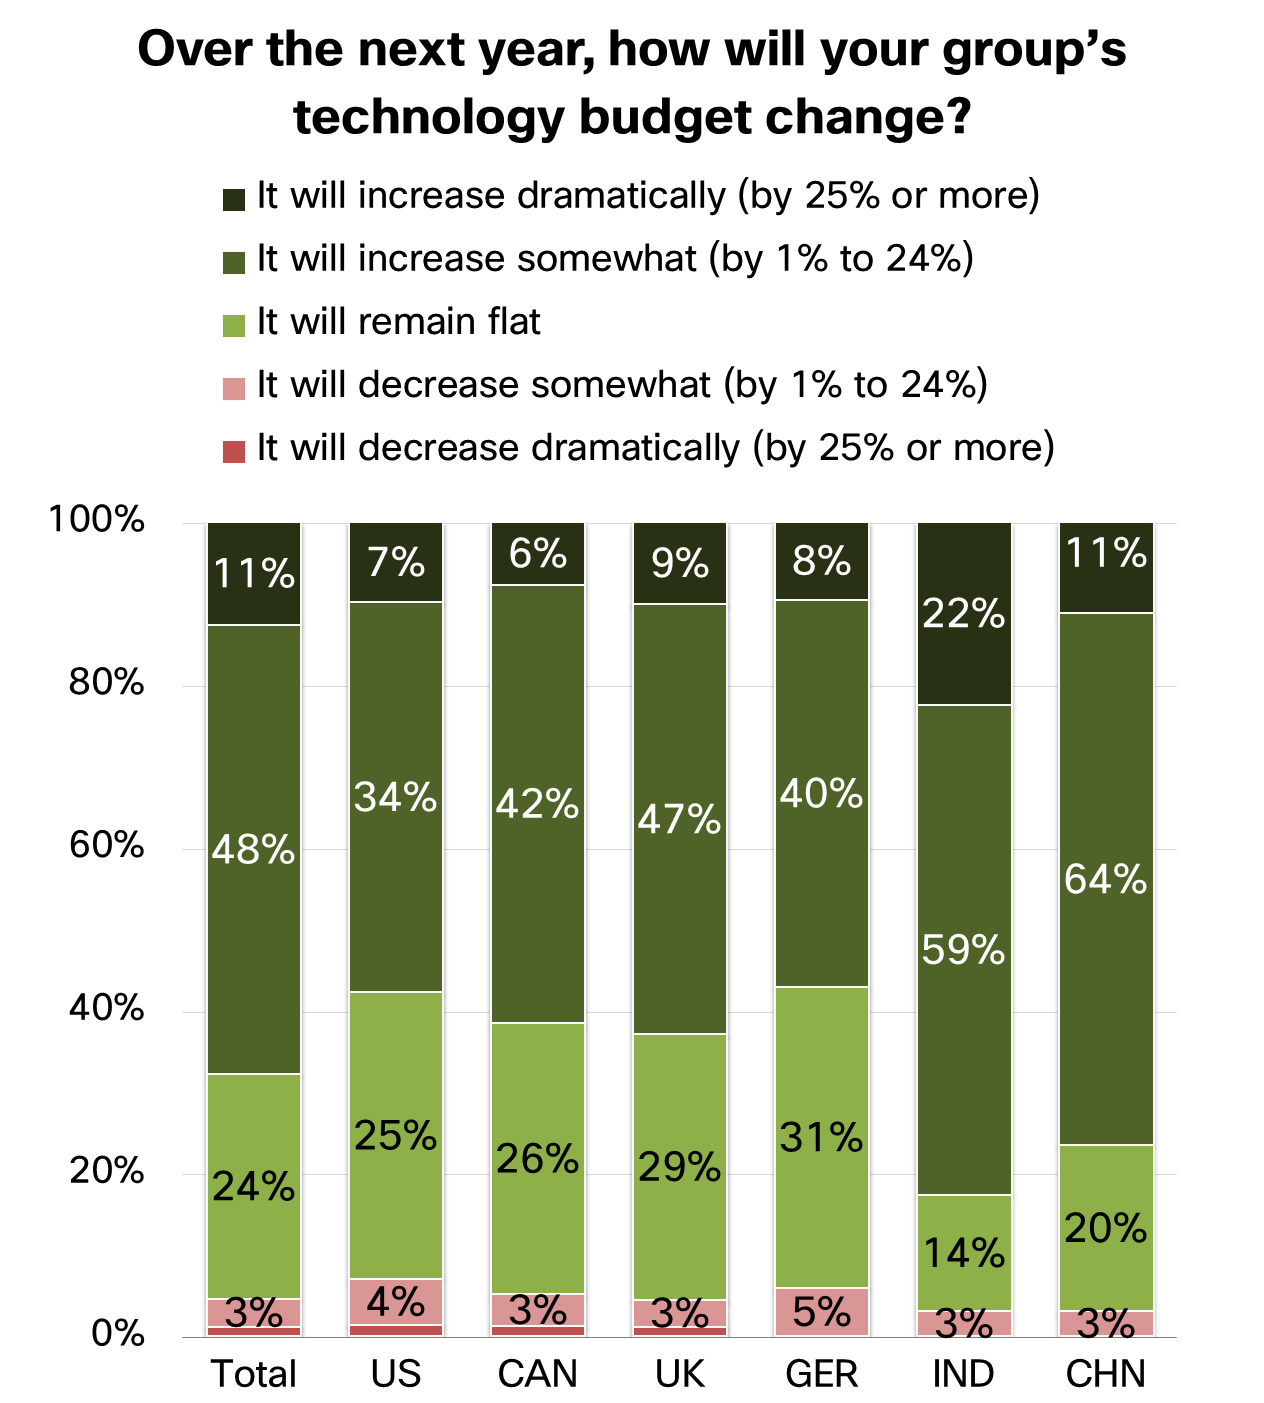 Over the next year how will your group’s technology budget change